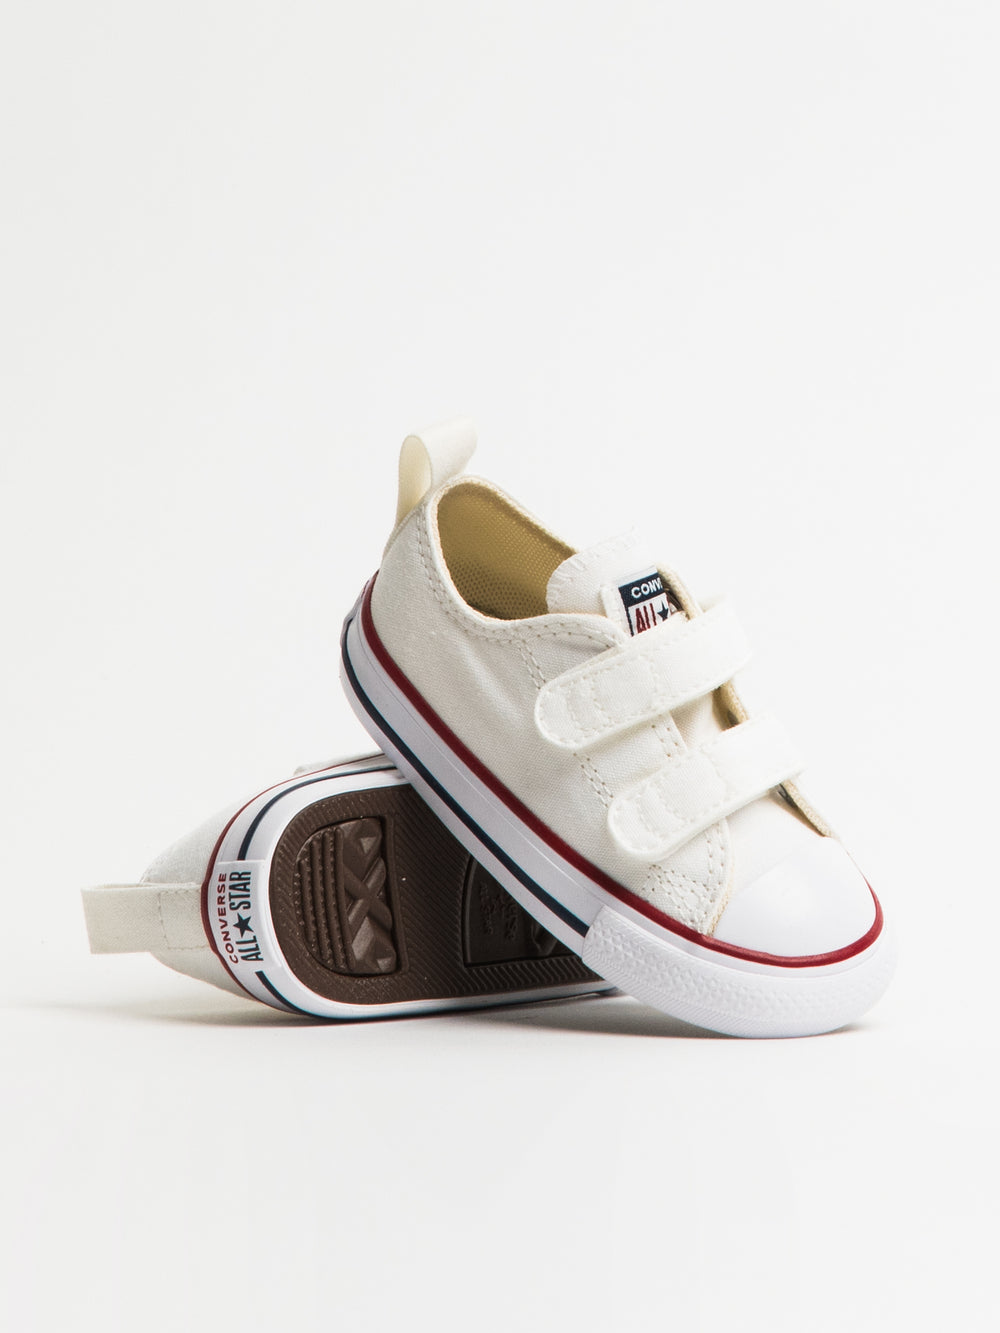 CHUCK TAYLOR ALL-STAR 2V LOW TOP